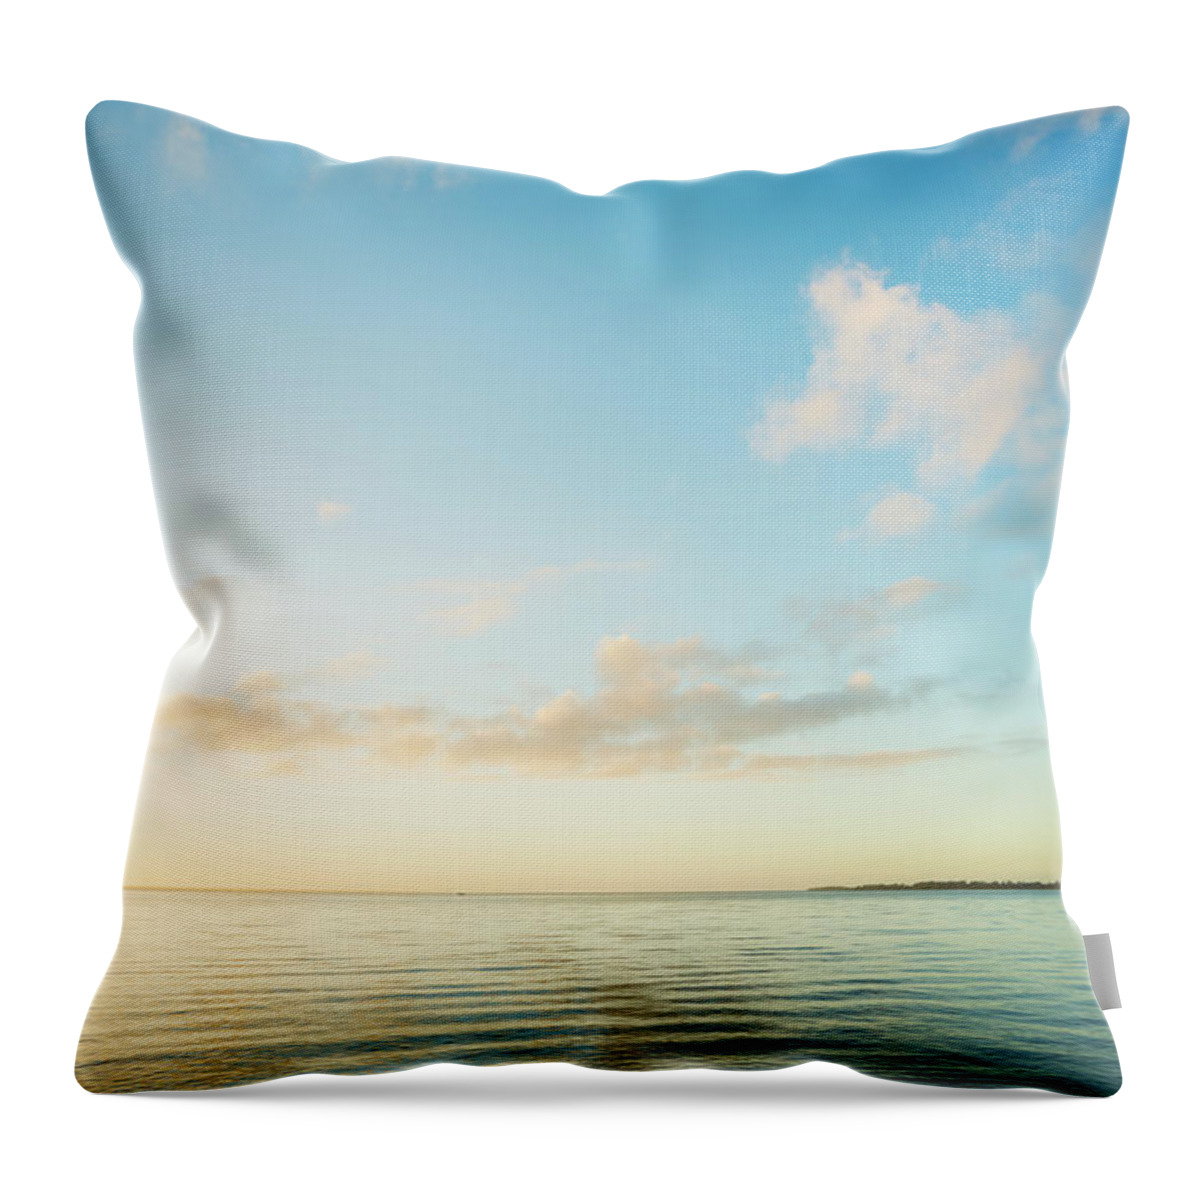 Scenics Throw Pillow featuring the photograph Sunrise Over Sea by Spooh